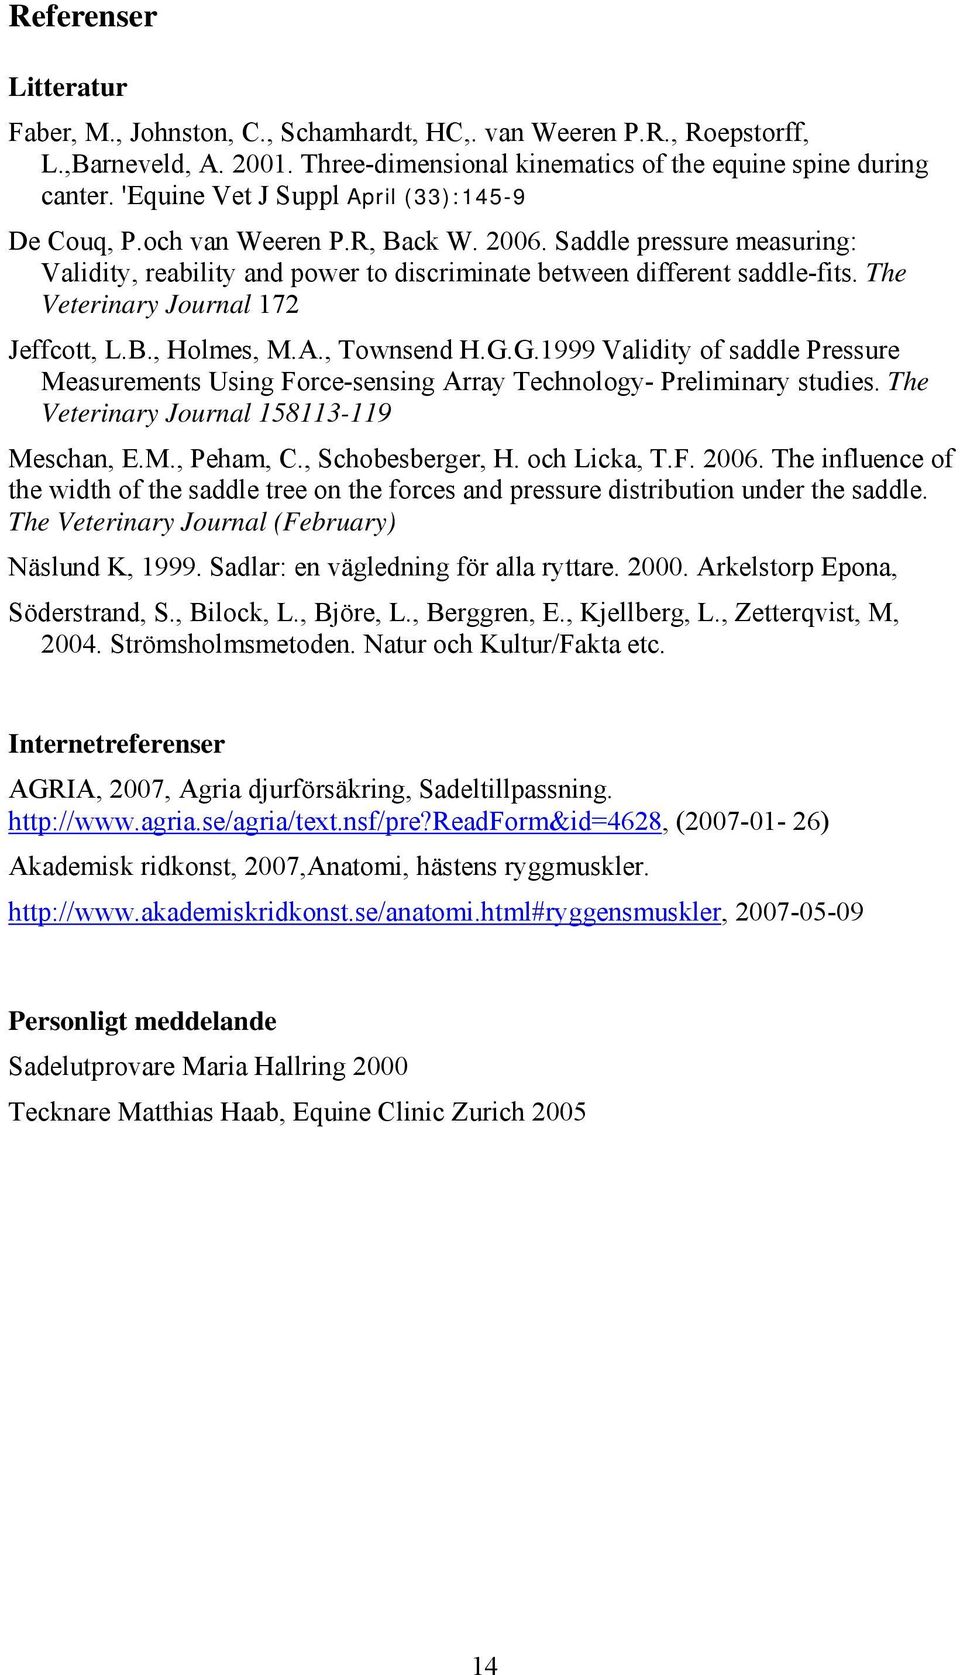 The Veterinary Journal 172 Jeffcott, L.B., Holmes, M.A., Townsend H.G.G.1999 Validity of saddle Pressure Measurements Using Force-sensing Array Technology- Preliminary studies.